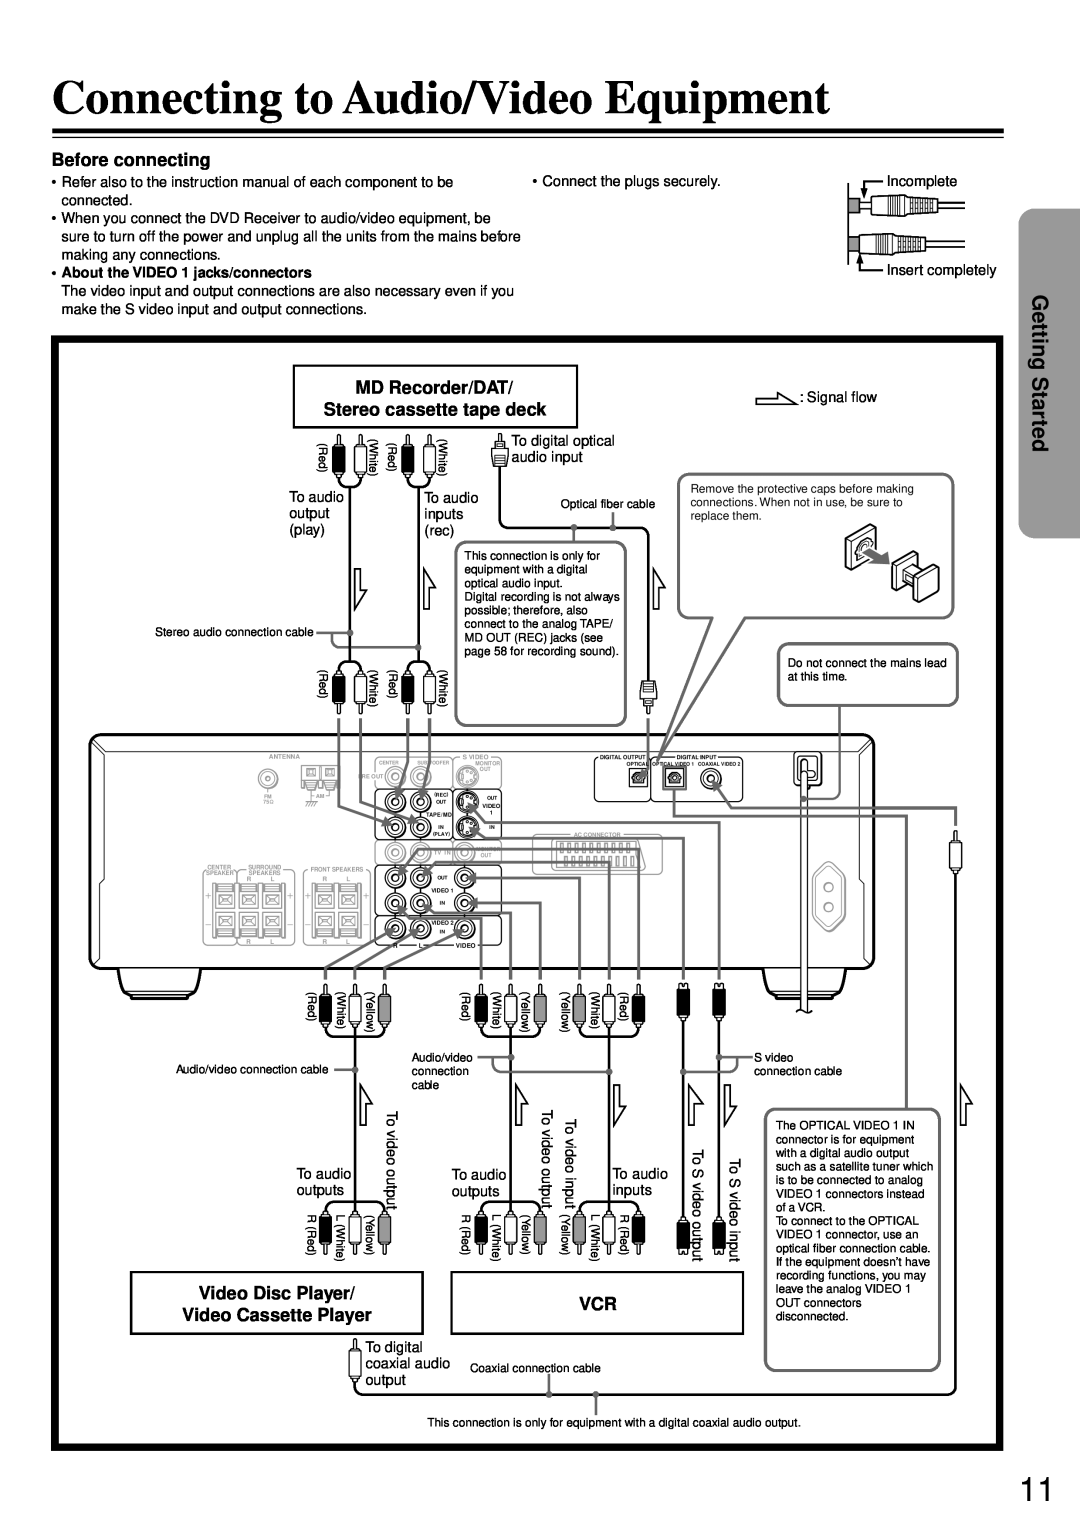 Onkyo DR-90 instruction manual Connecting to Audio/Video Equipment, Getting Started, Before connecting, MD Recorder/DAT 